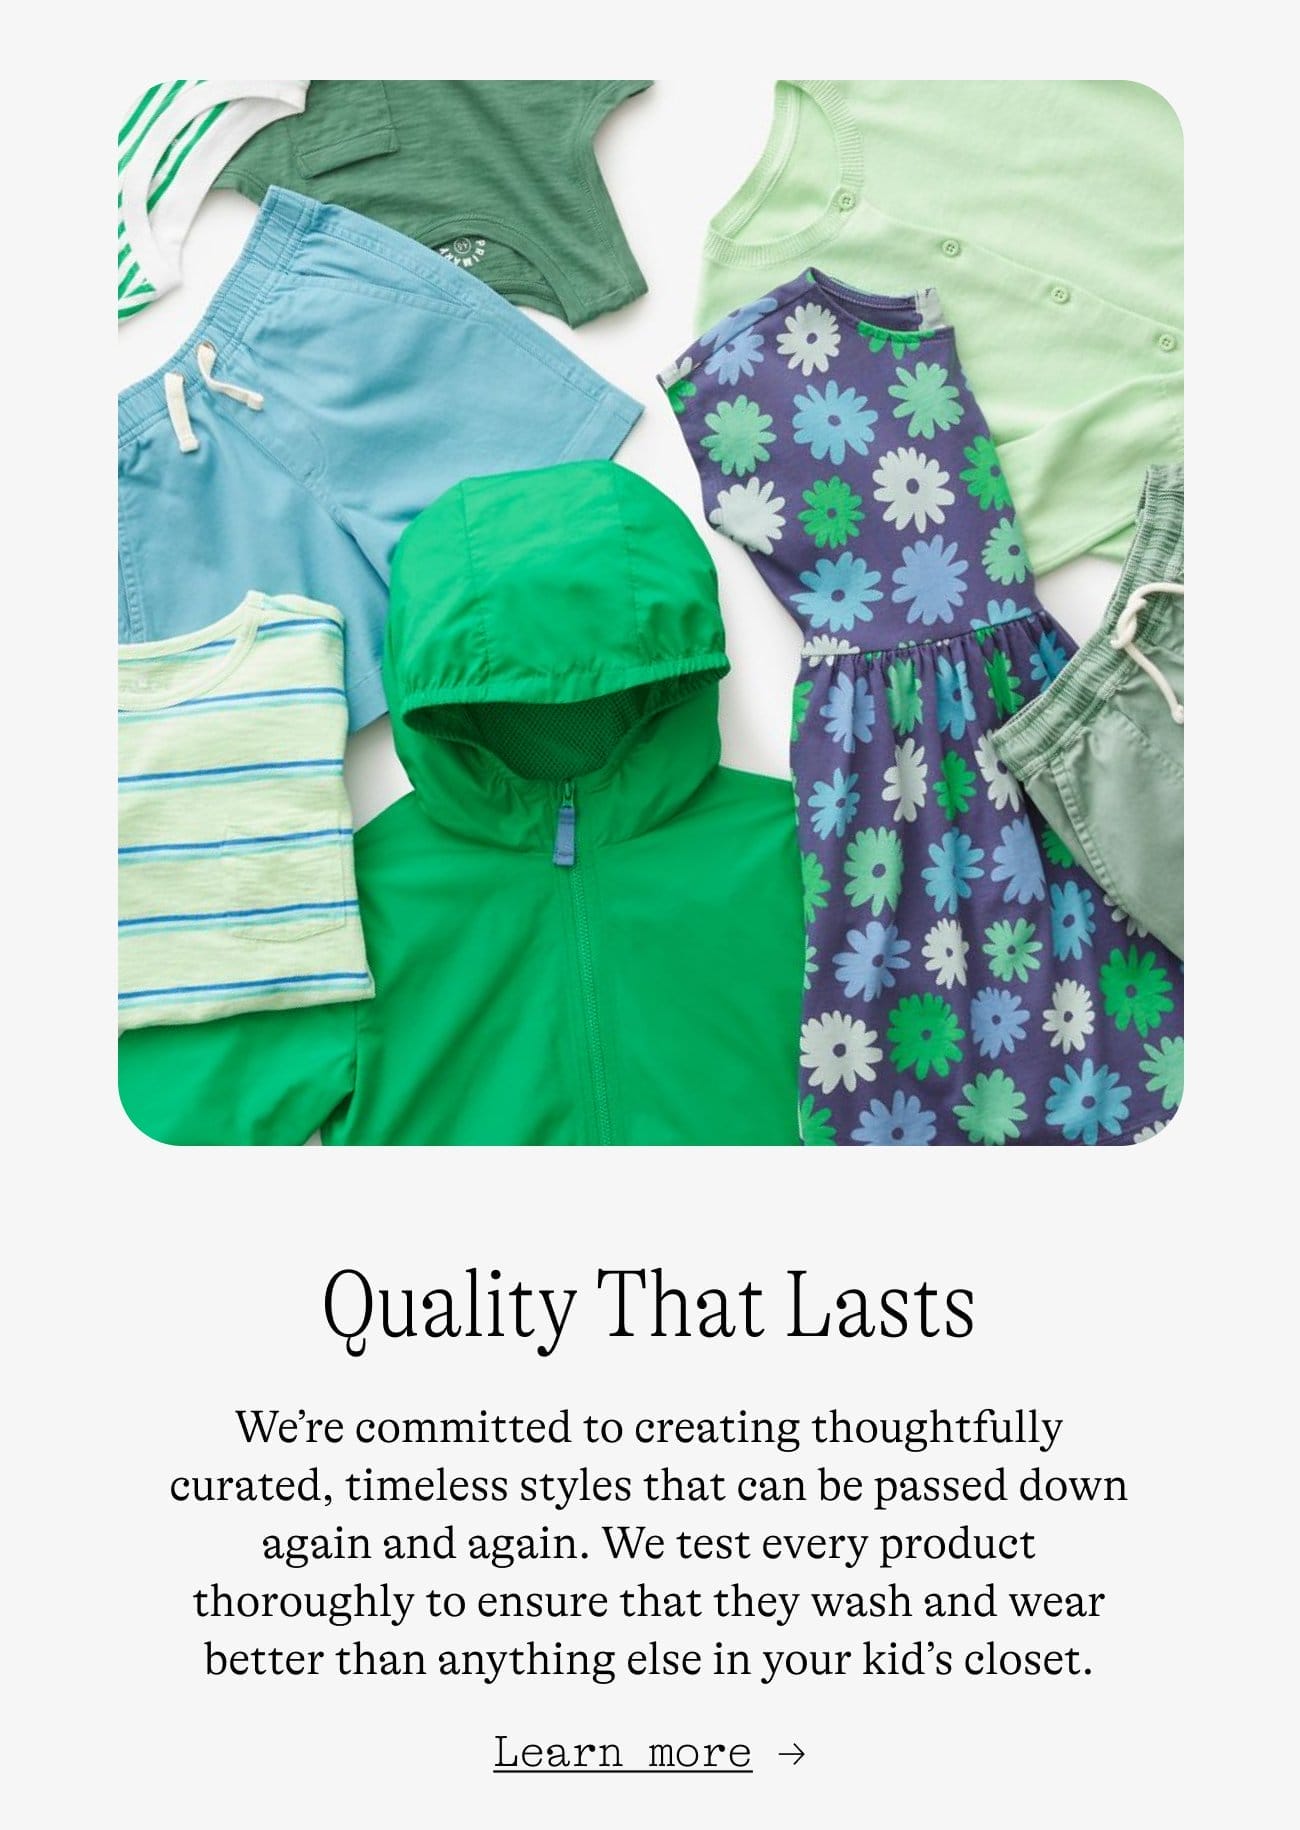 Quality That Lasts. We’re committed to creating thoughtfully curated, timeless styles that can be passed down again and again. We test every product thoroughly to ensure that they wash and wear better than anything else in your kid’s closet. Learn more →